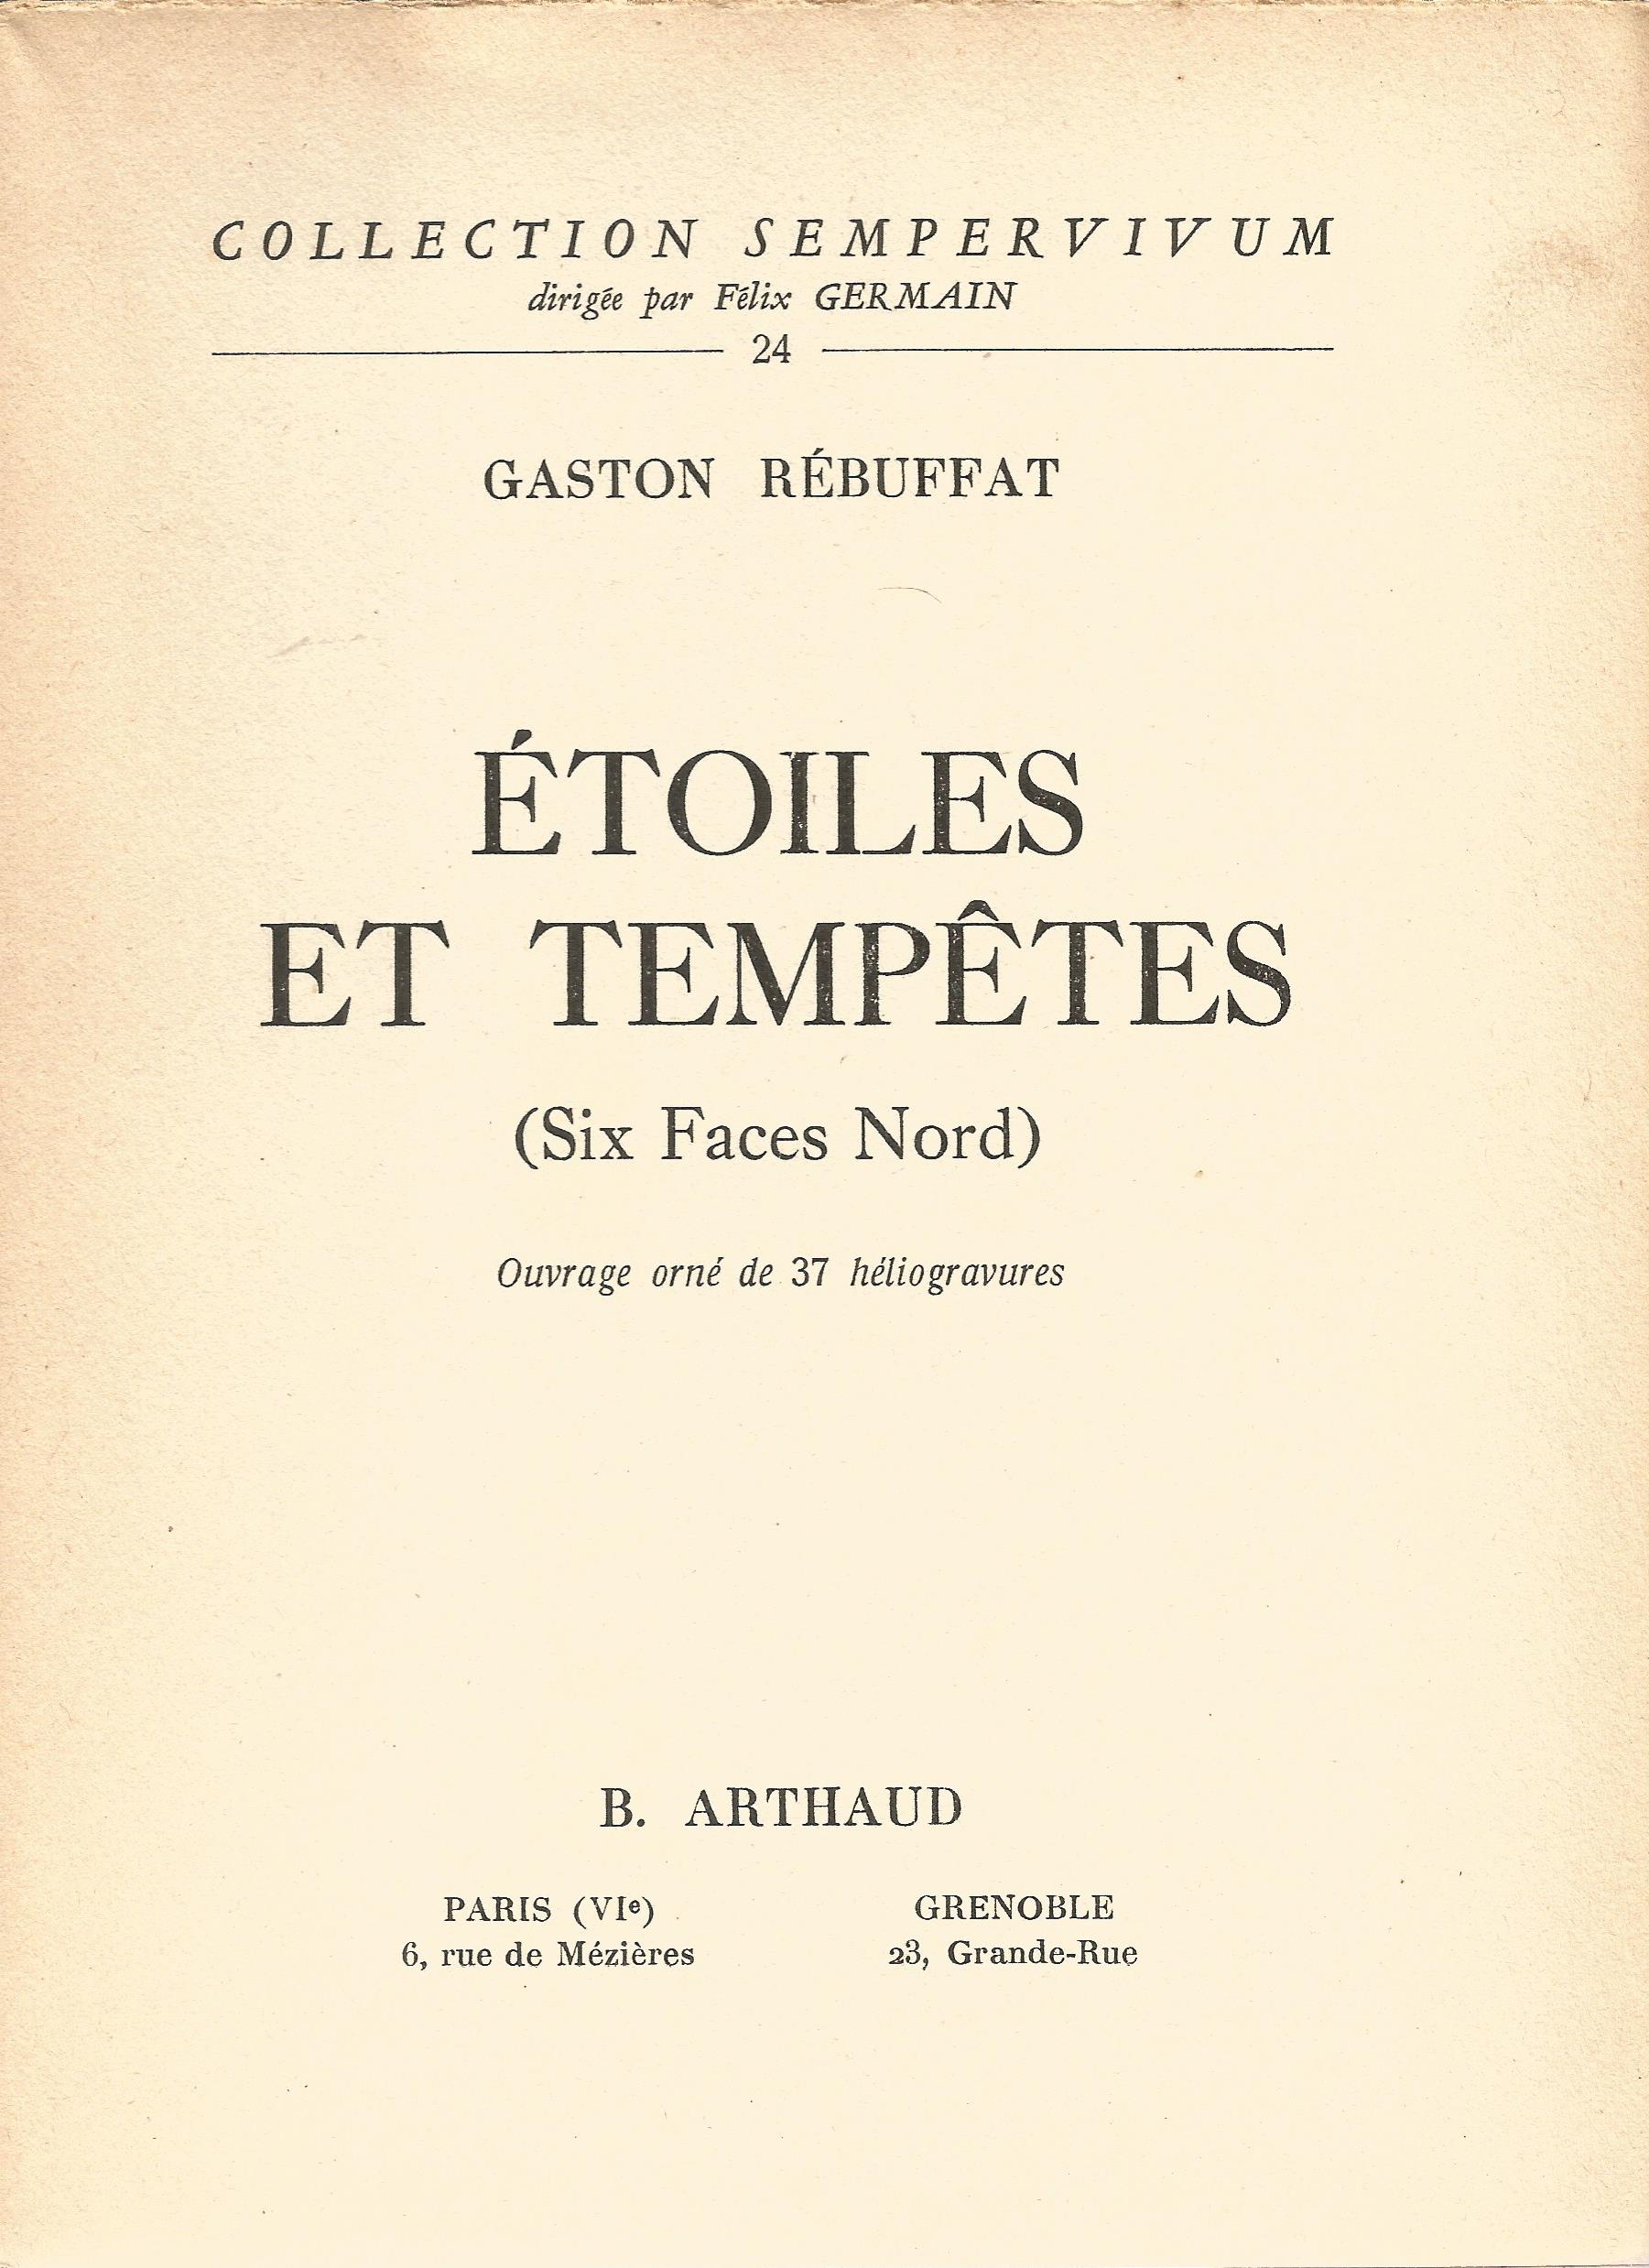 Etoiles Et Tempetes (Six Faces Nord) Gaston Rebuffat Softback Book 1954 published by B Arthaud - Image 2 of 4